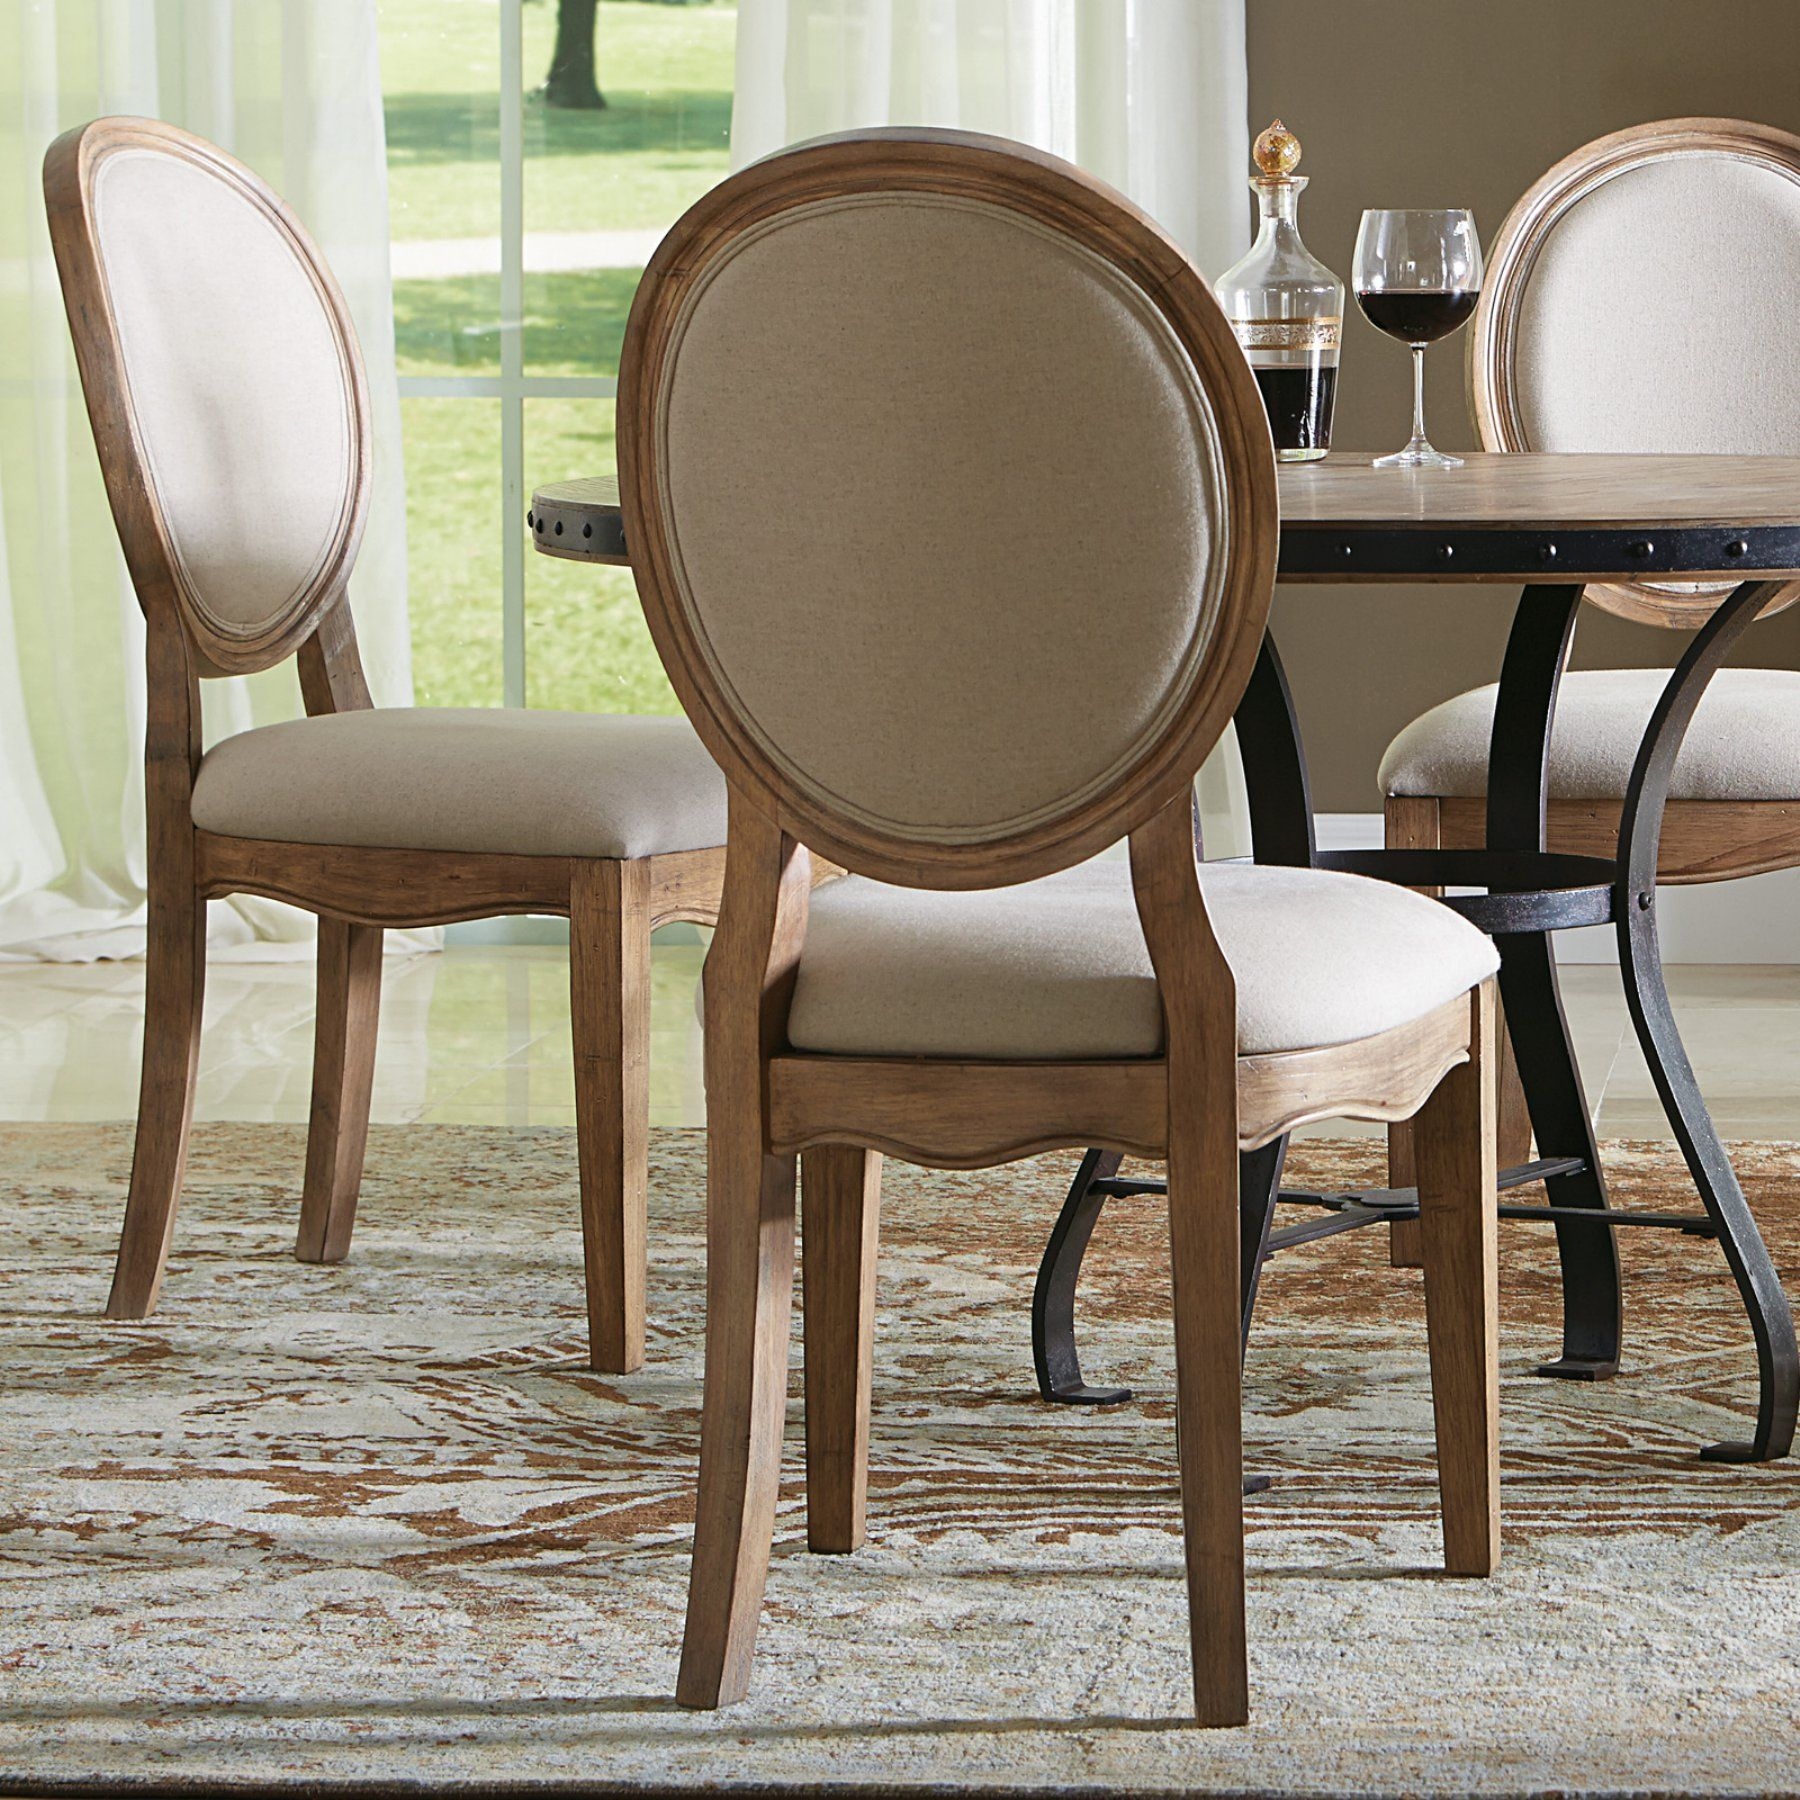 Round Back Dining Chairs Visualhunt, Round Back Dining Room Sets